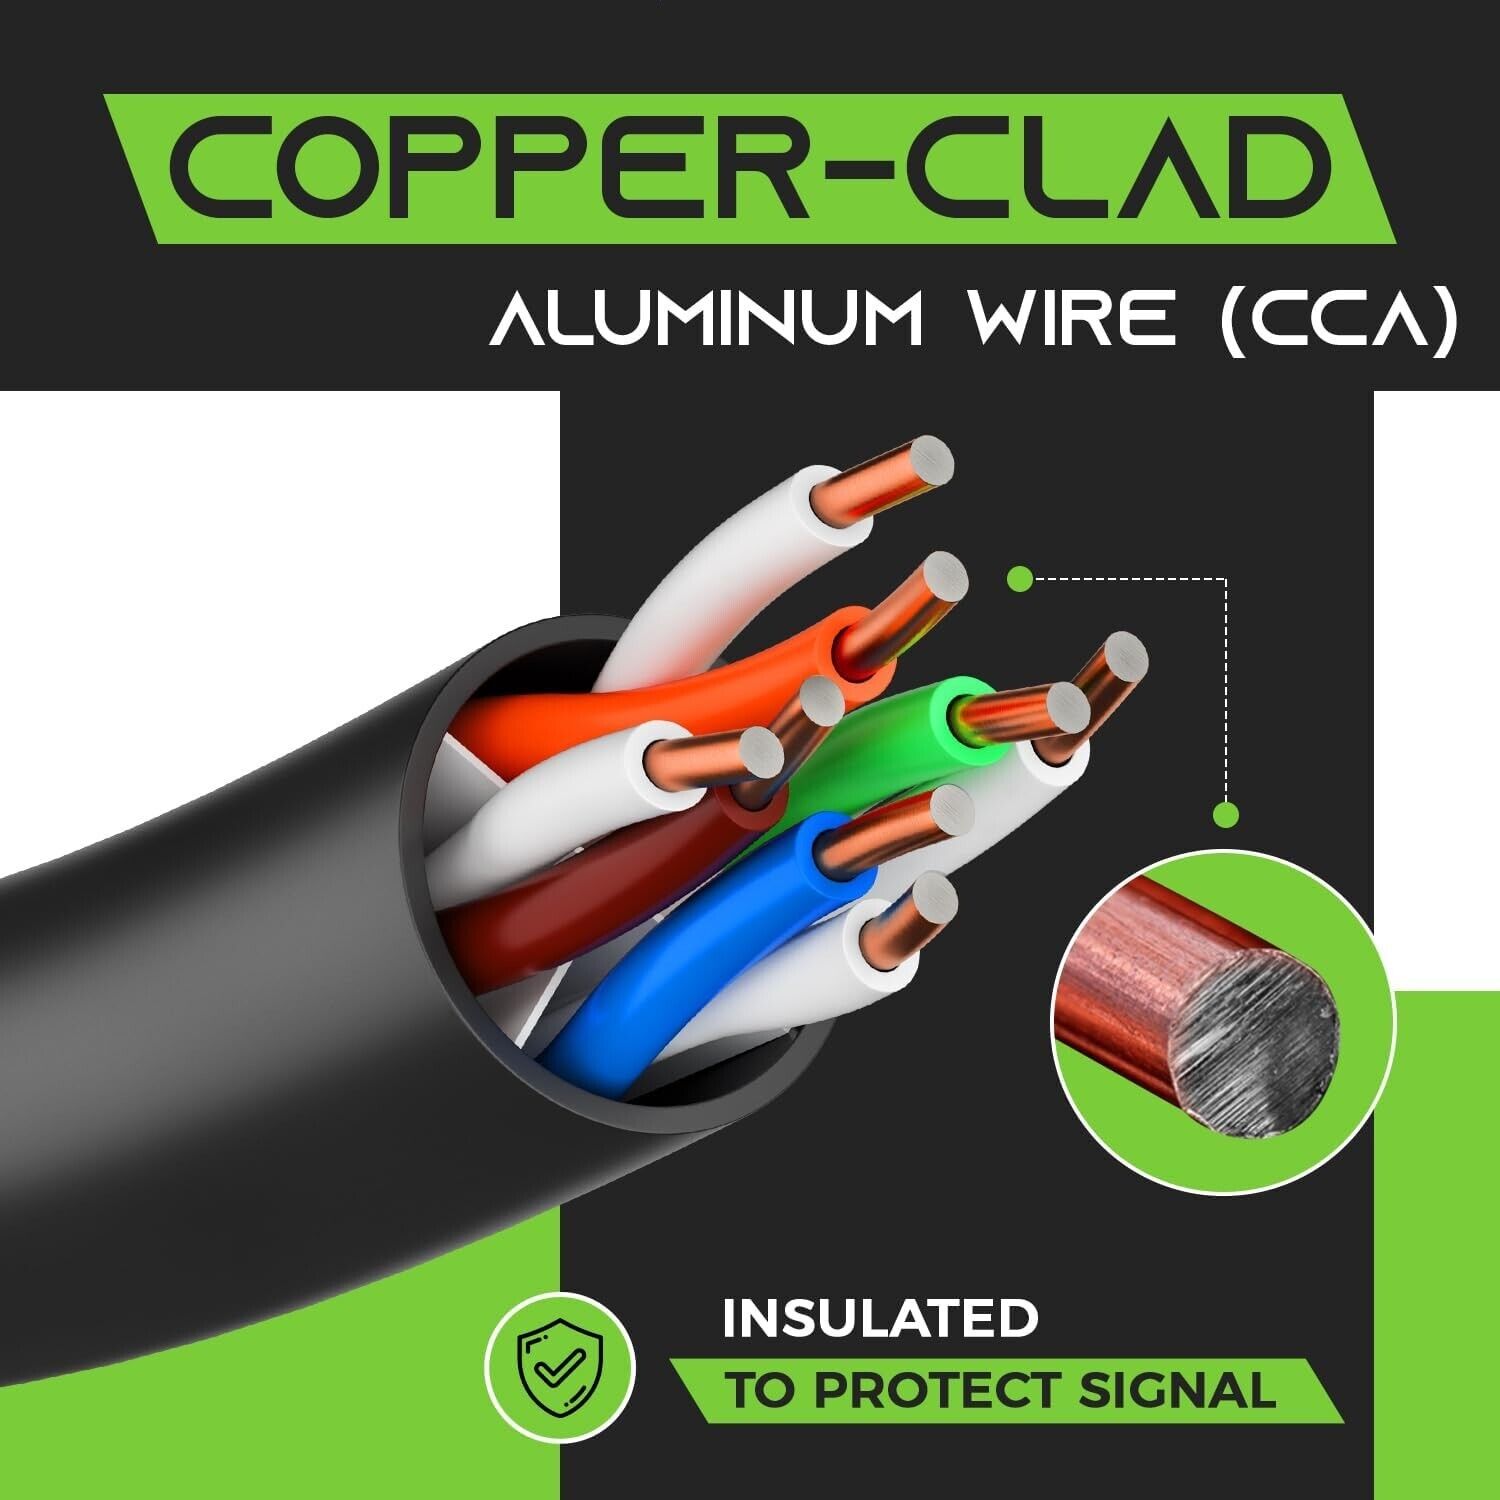 Cat6 Outdoor Ethernet Cable (250 Feet) CCA Copper Clad, Waterproof, Direct Buria